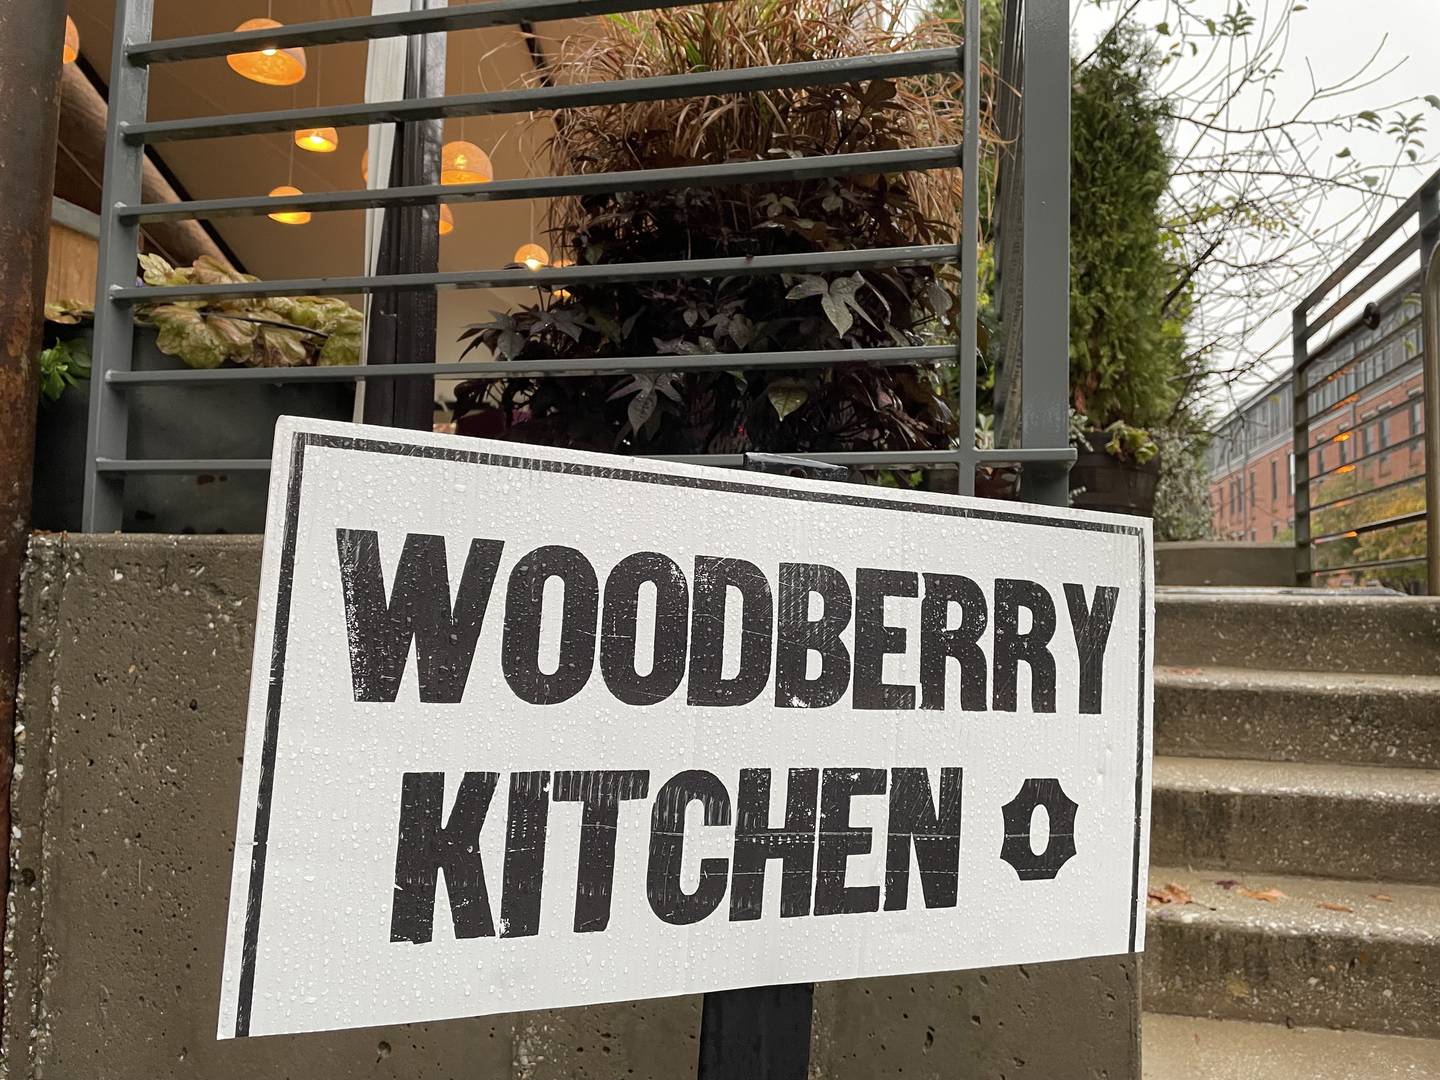 It’s been a long, strange year on the Baltimore food scene without the farm-to-table fare of Woodberry Kitchen that is expected to reopen as Woodberry Tavern.